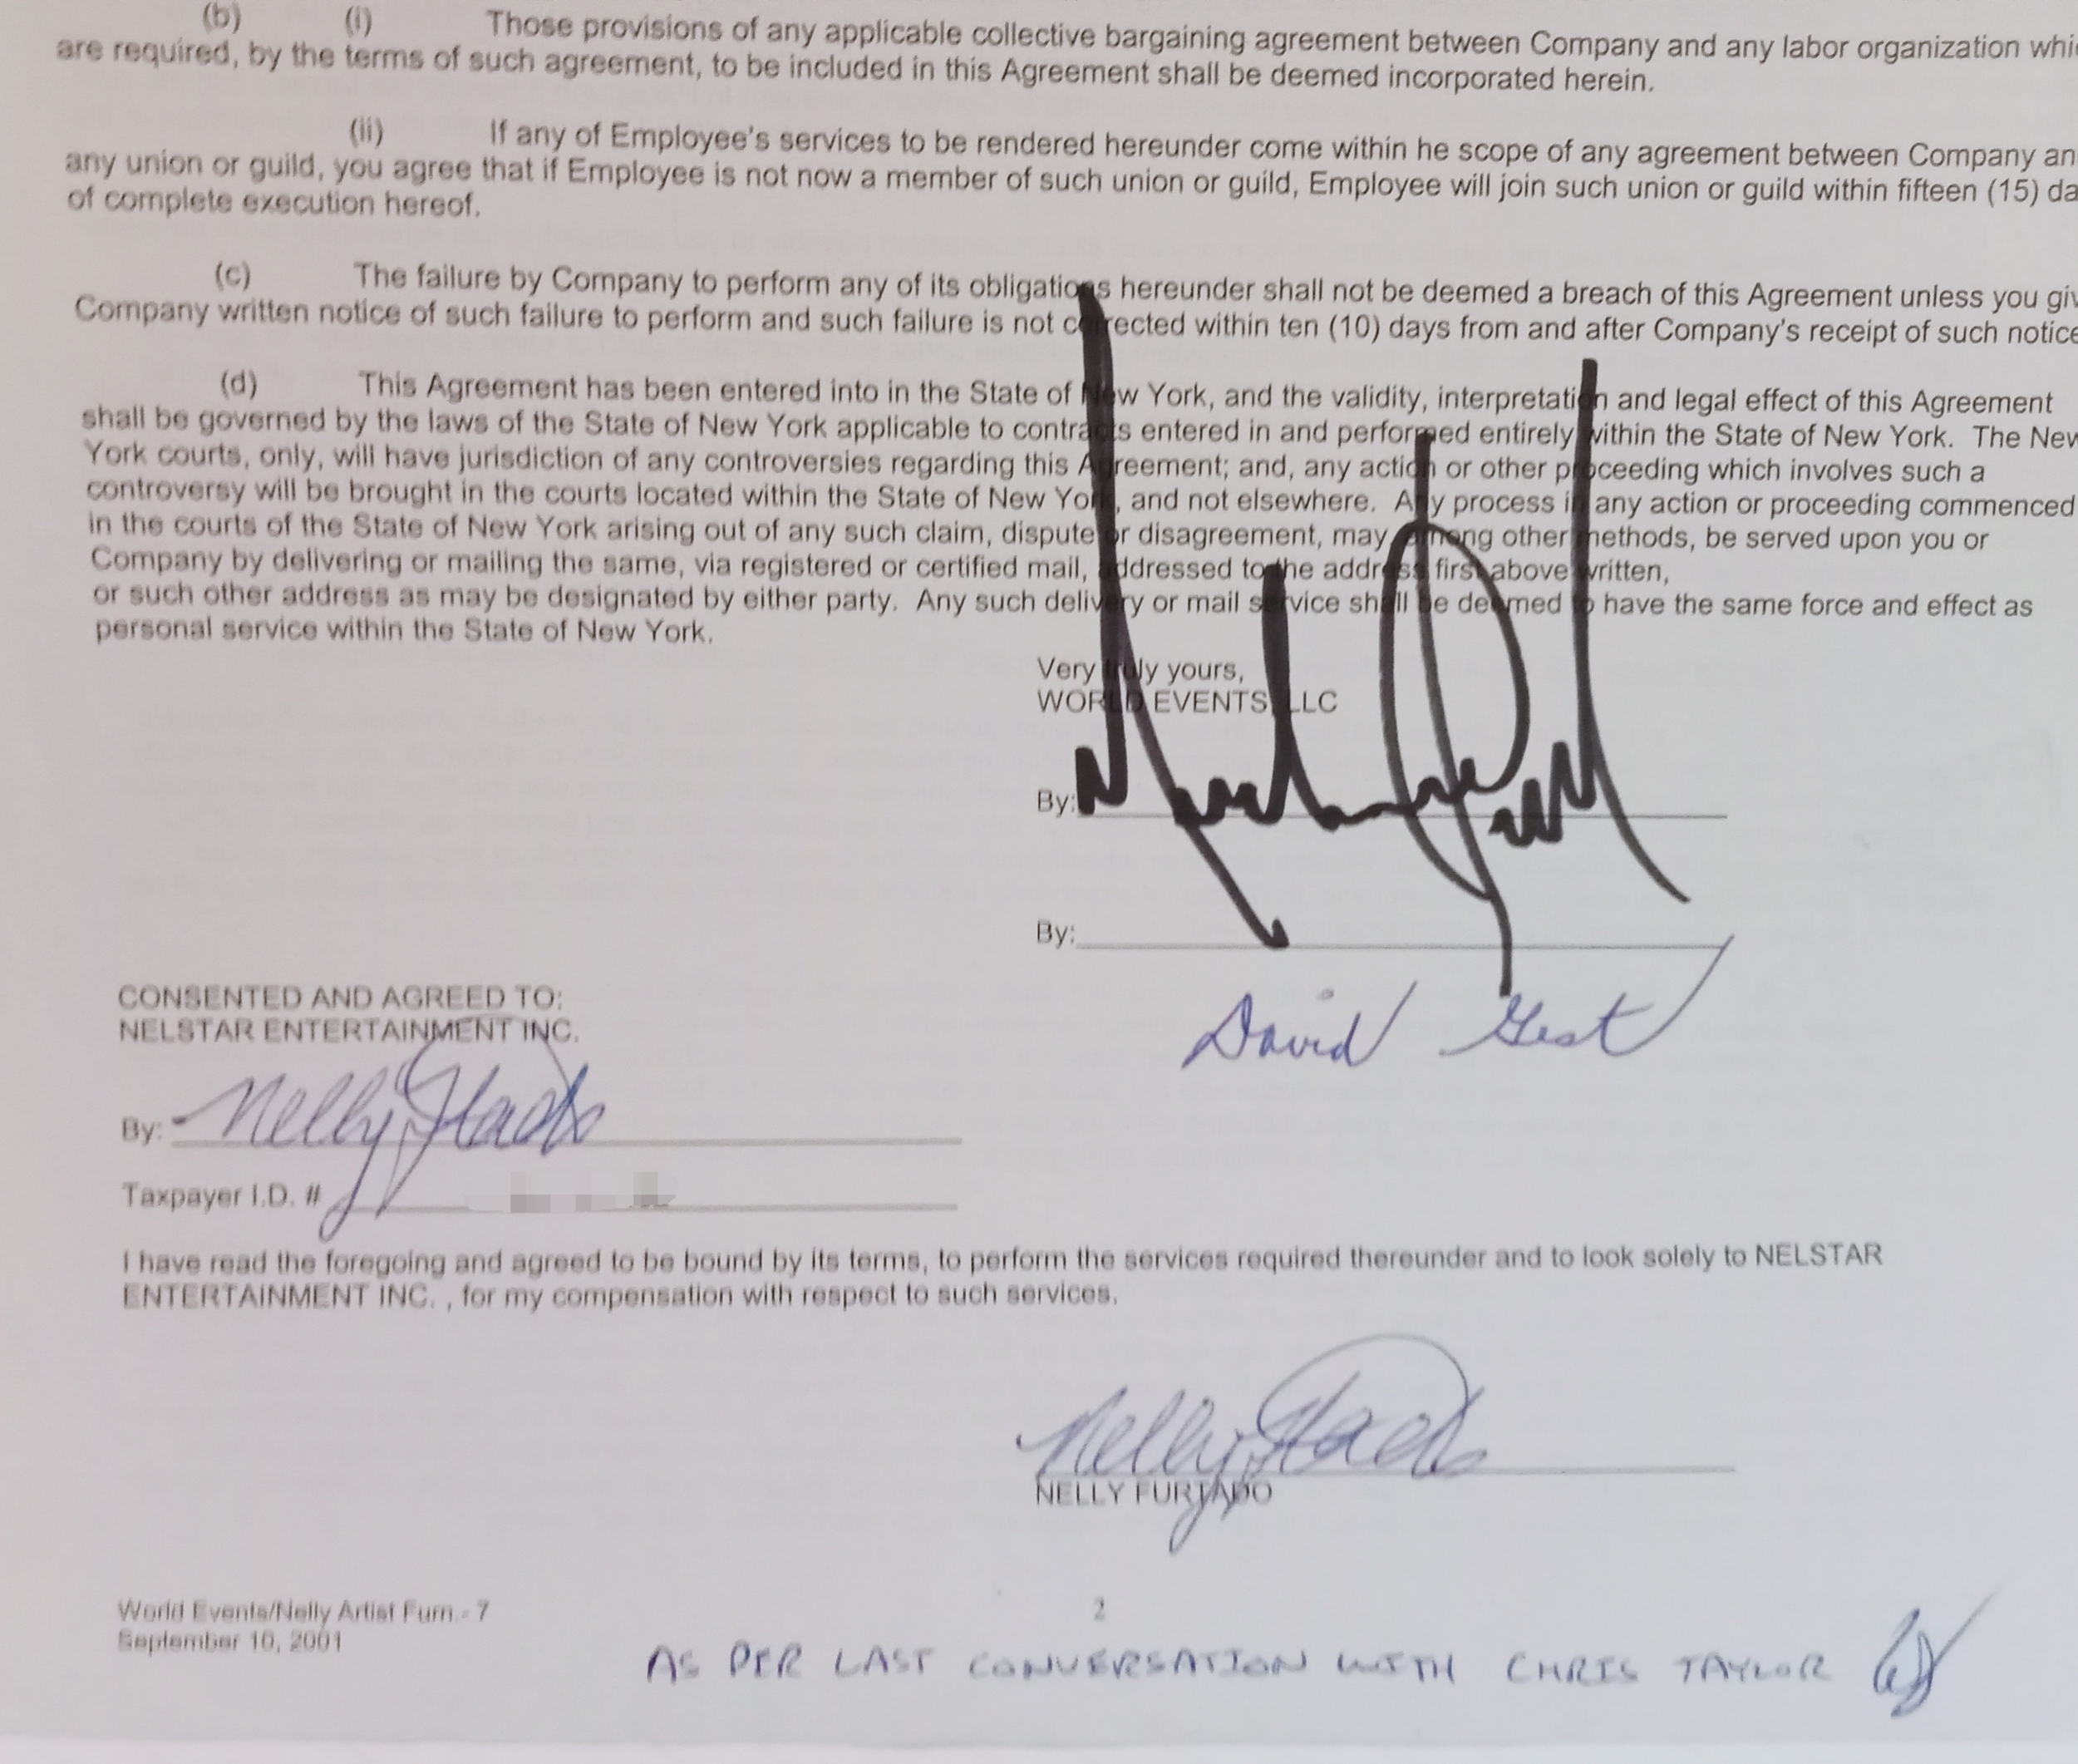 Contract for Michael Jackson 30th Anniversary Celebration The Solo Years, dated August 22nd 2001 - Image 3 of 4